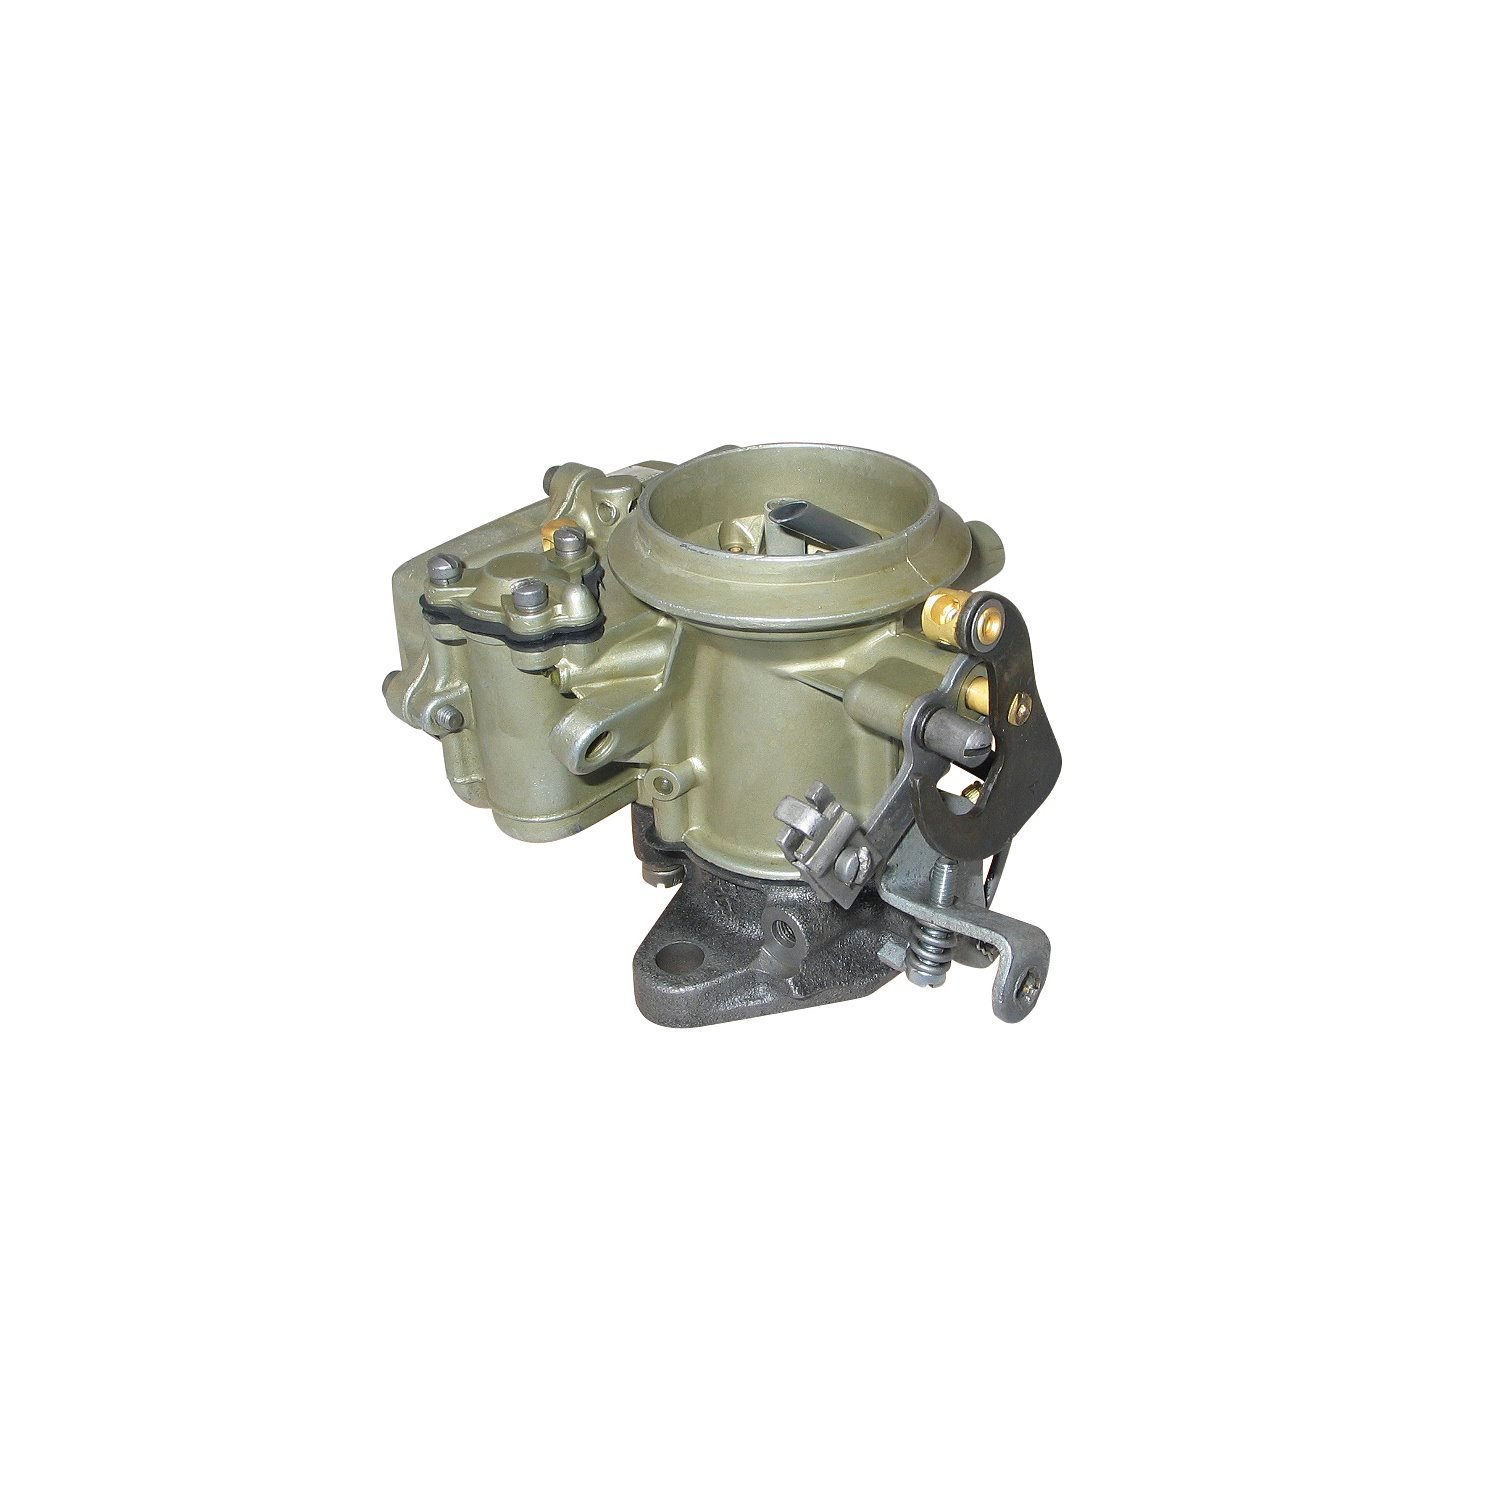 9-909 Holley Remanufactured Carburetor, 1904-Style